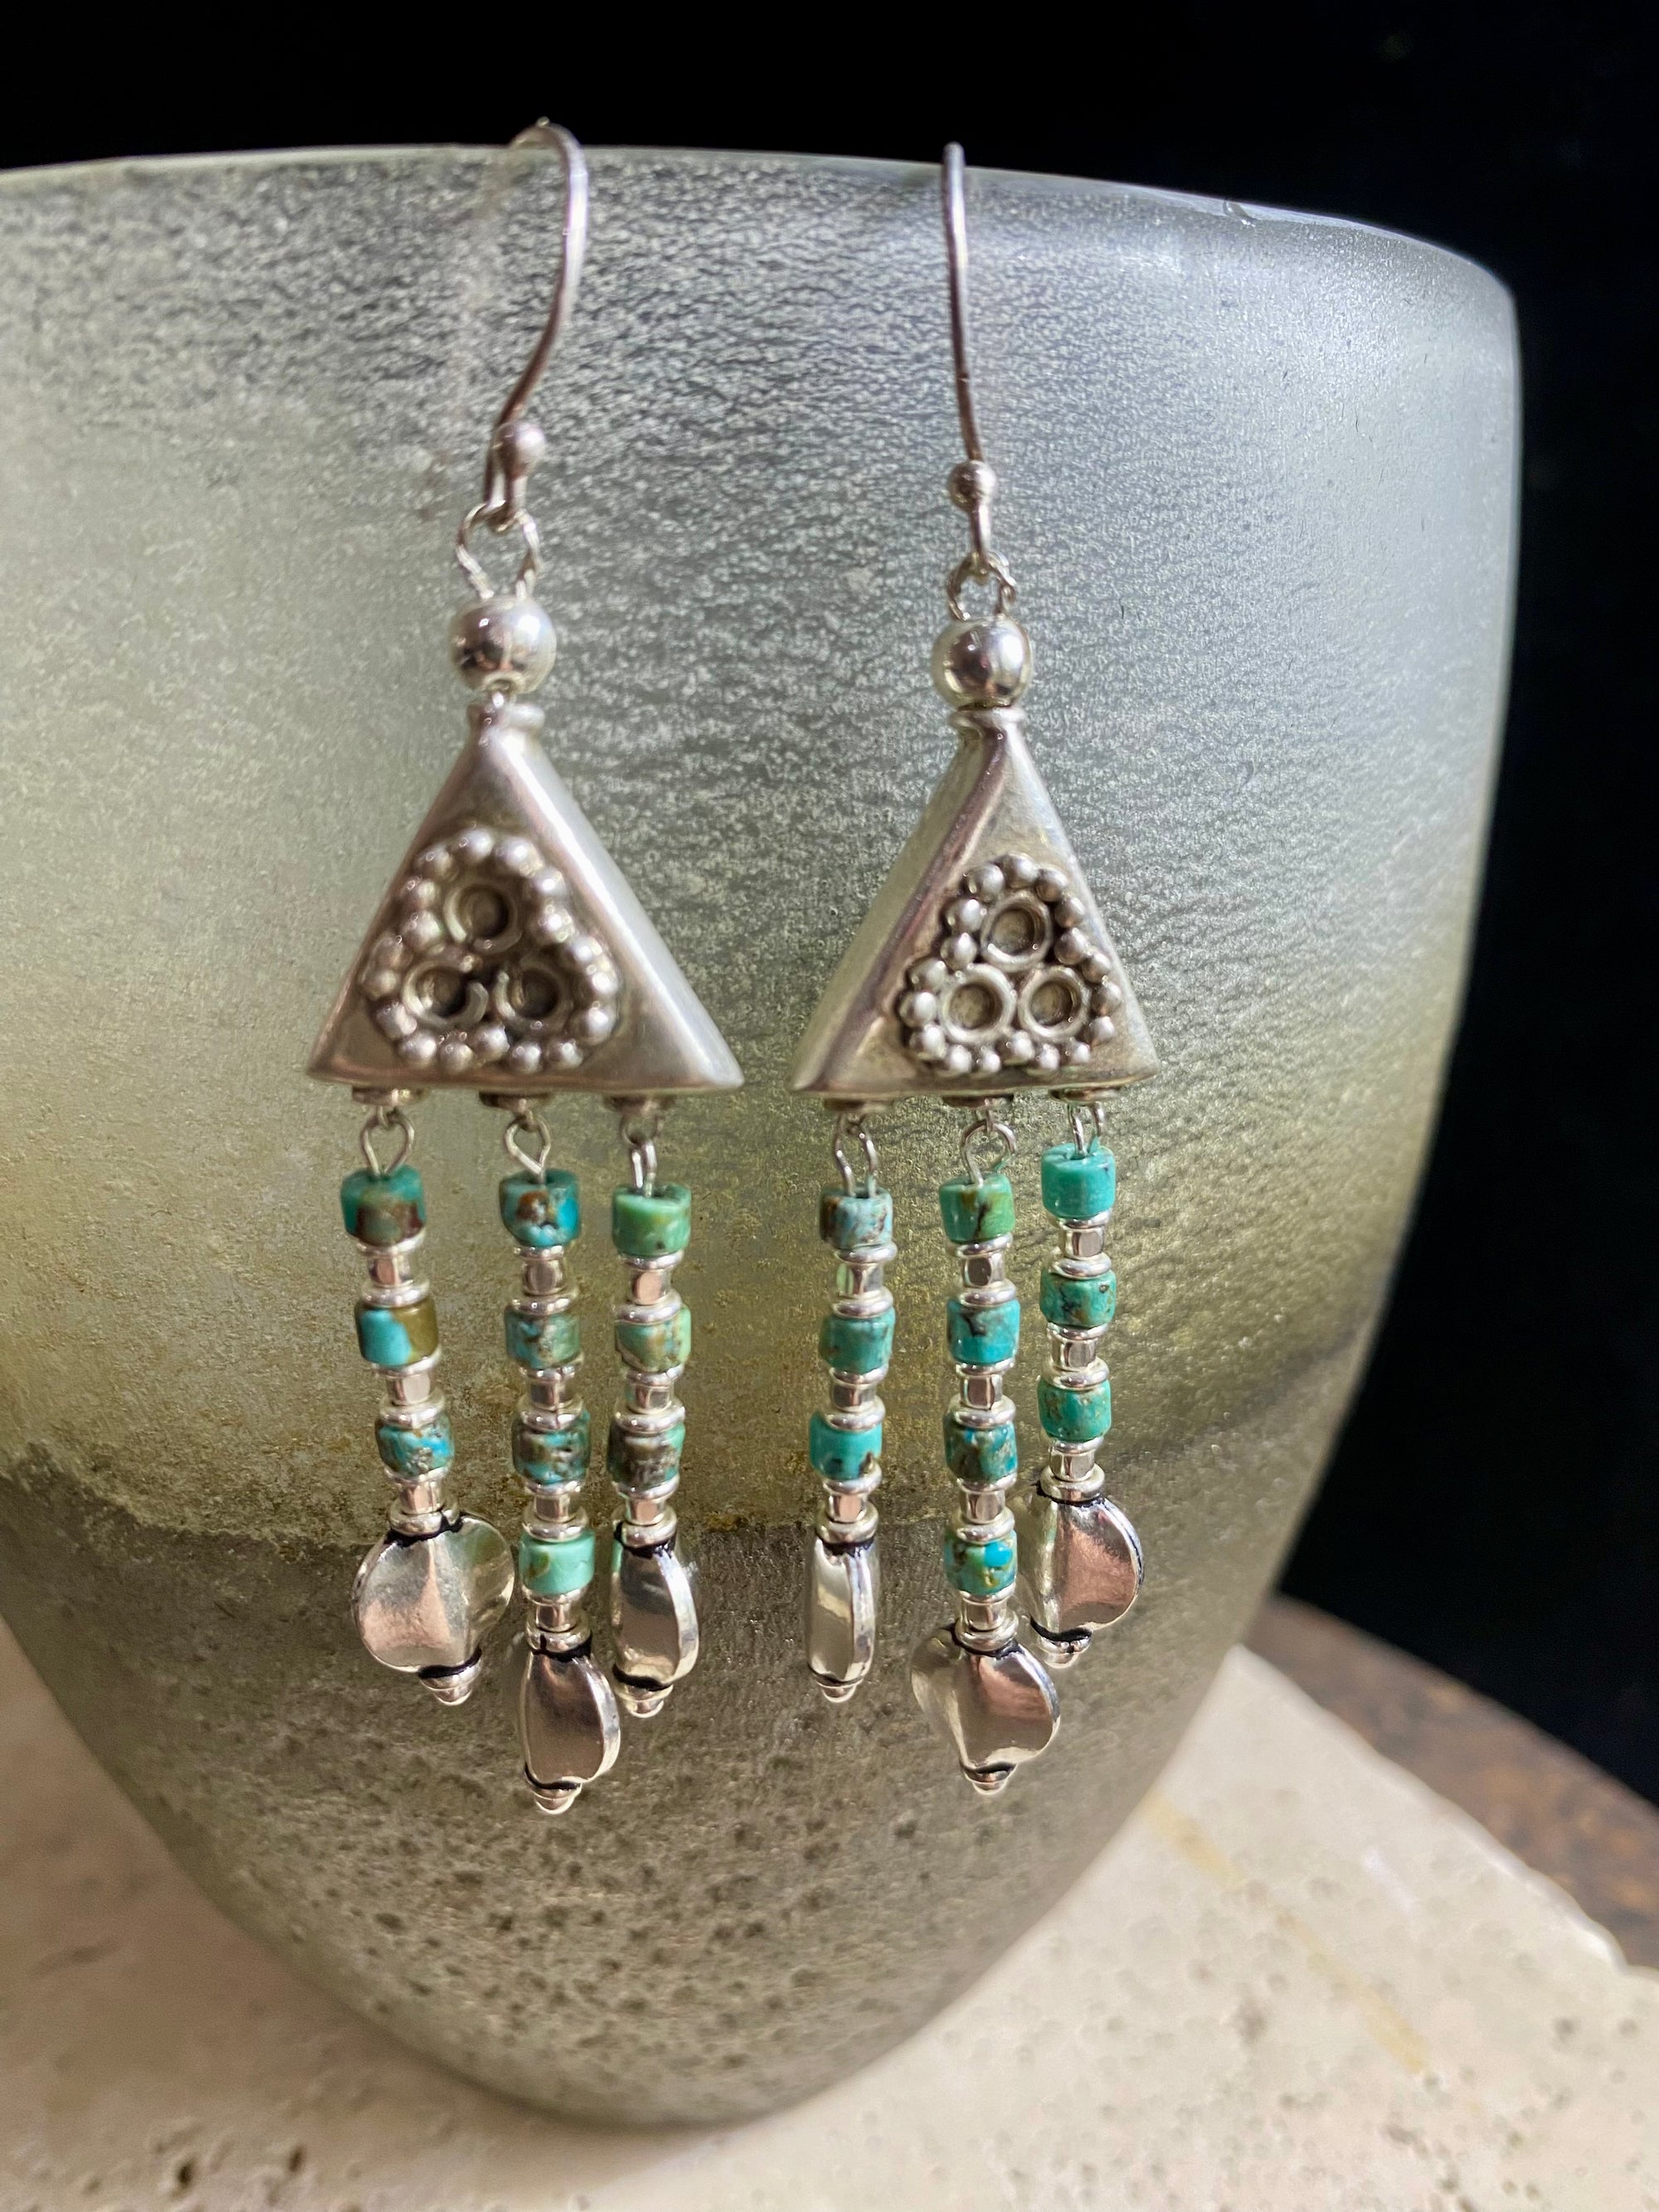 Three strand chandelier earrings crafted from natural Hubei turquoise and sterling silver handmade chandelier pieces, detailing and hooks. Stunning and unique, with an ancient Roman look and feel. Measurements: Length approximately 7.5 cm